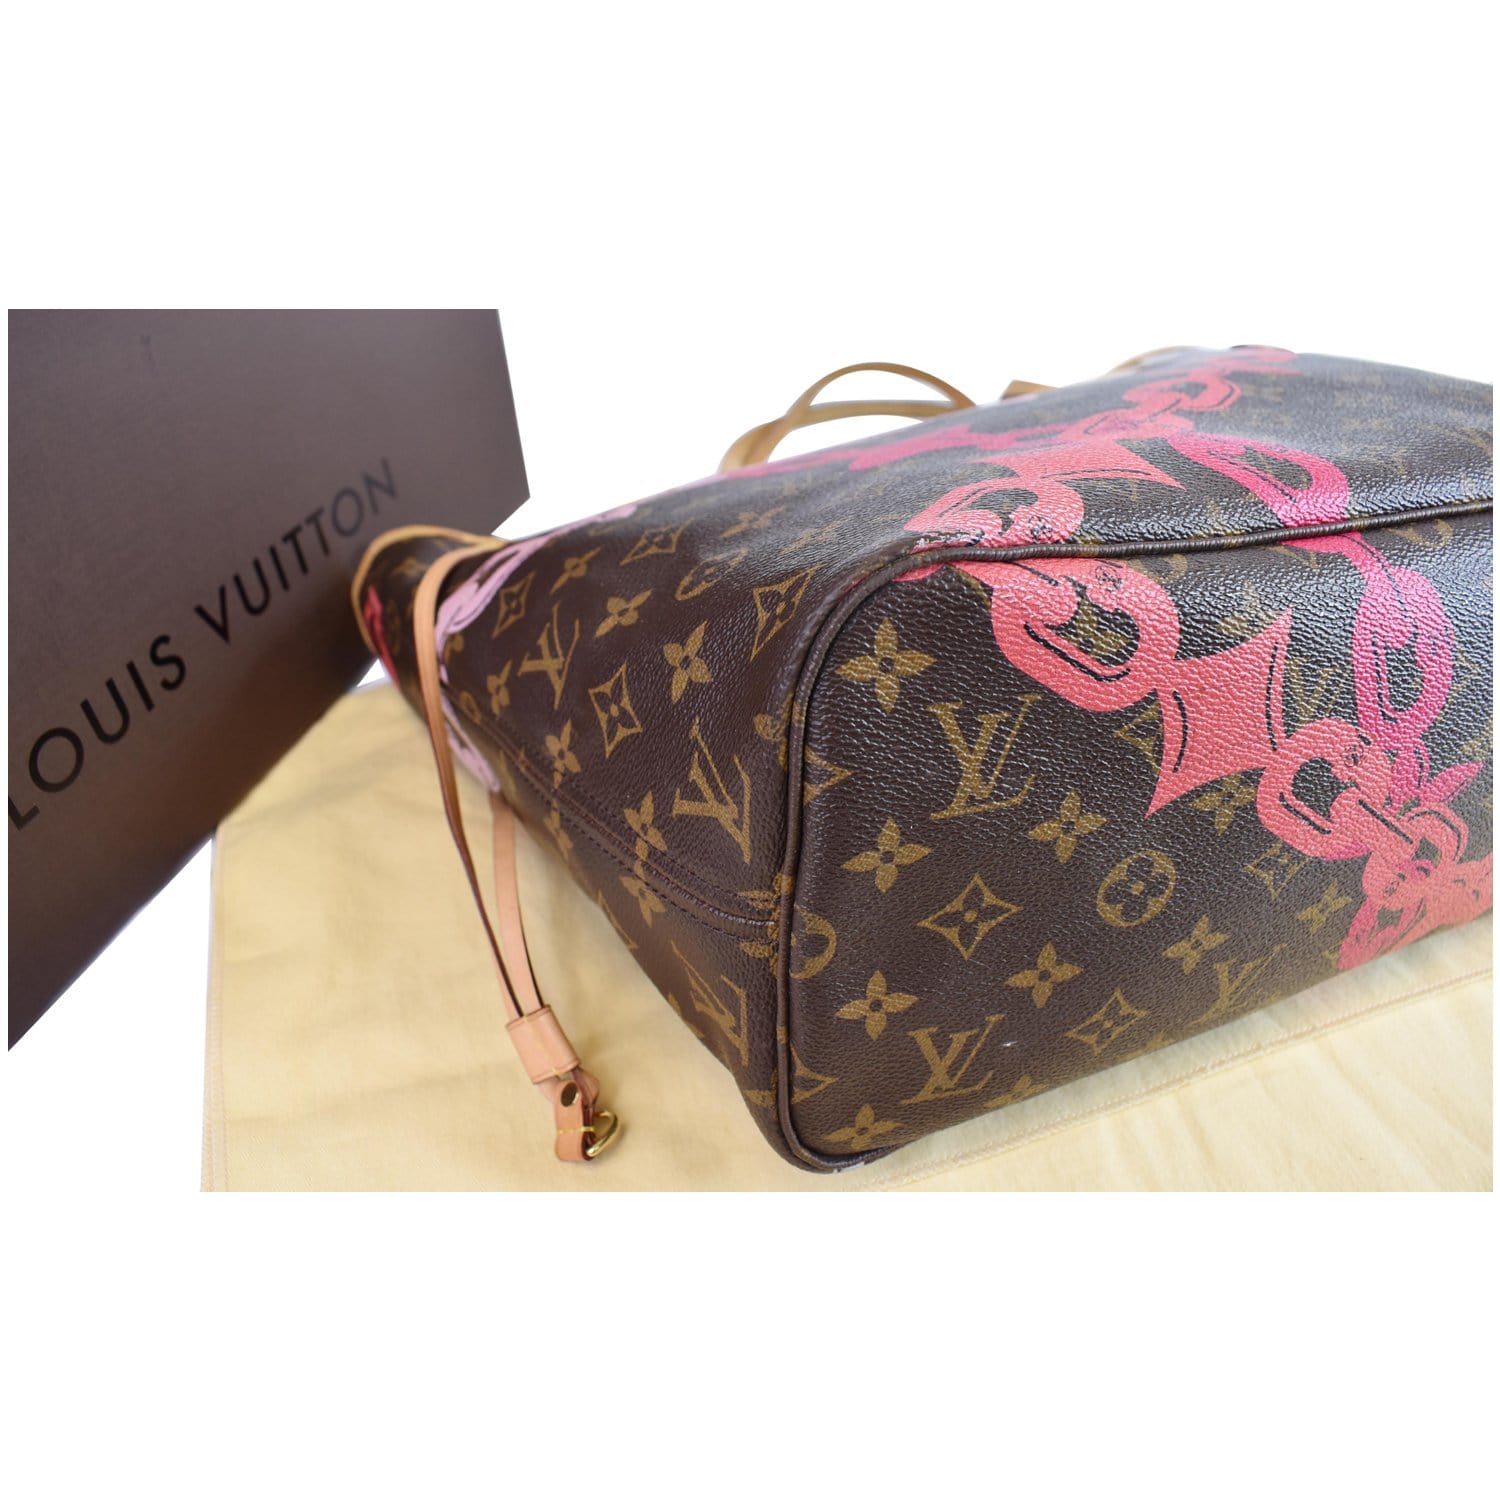 Original Louis Vuitton Neverfull MM Limited Edition Bay chain